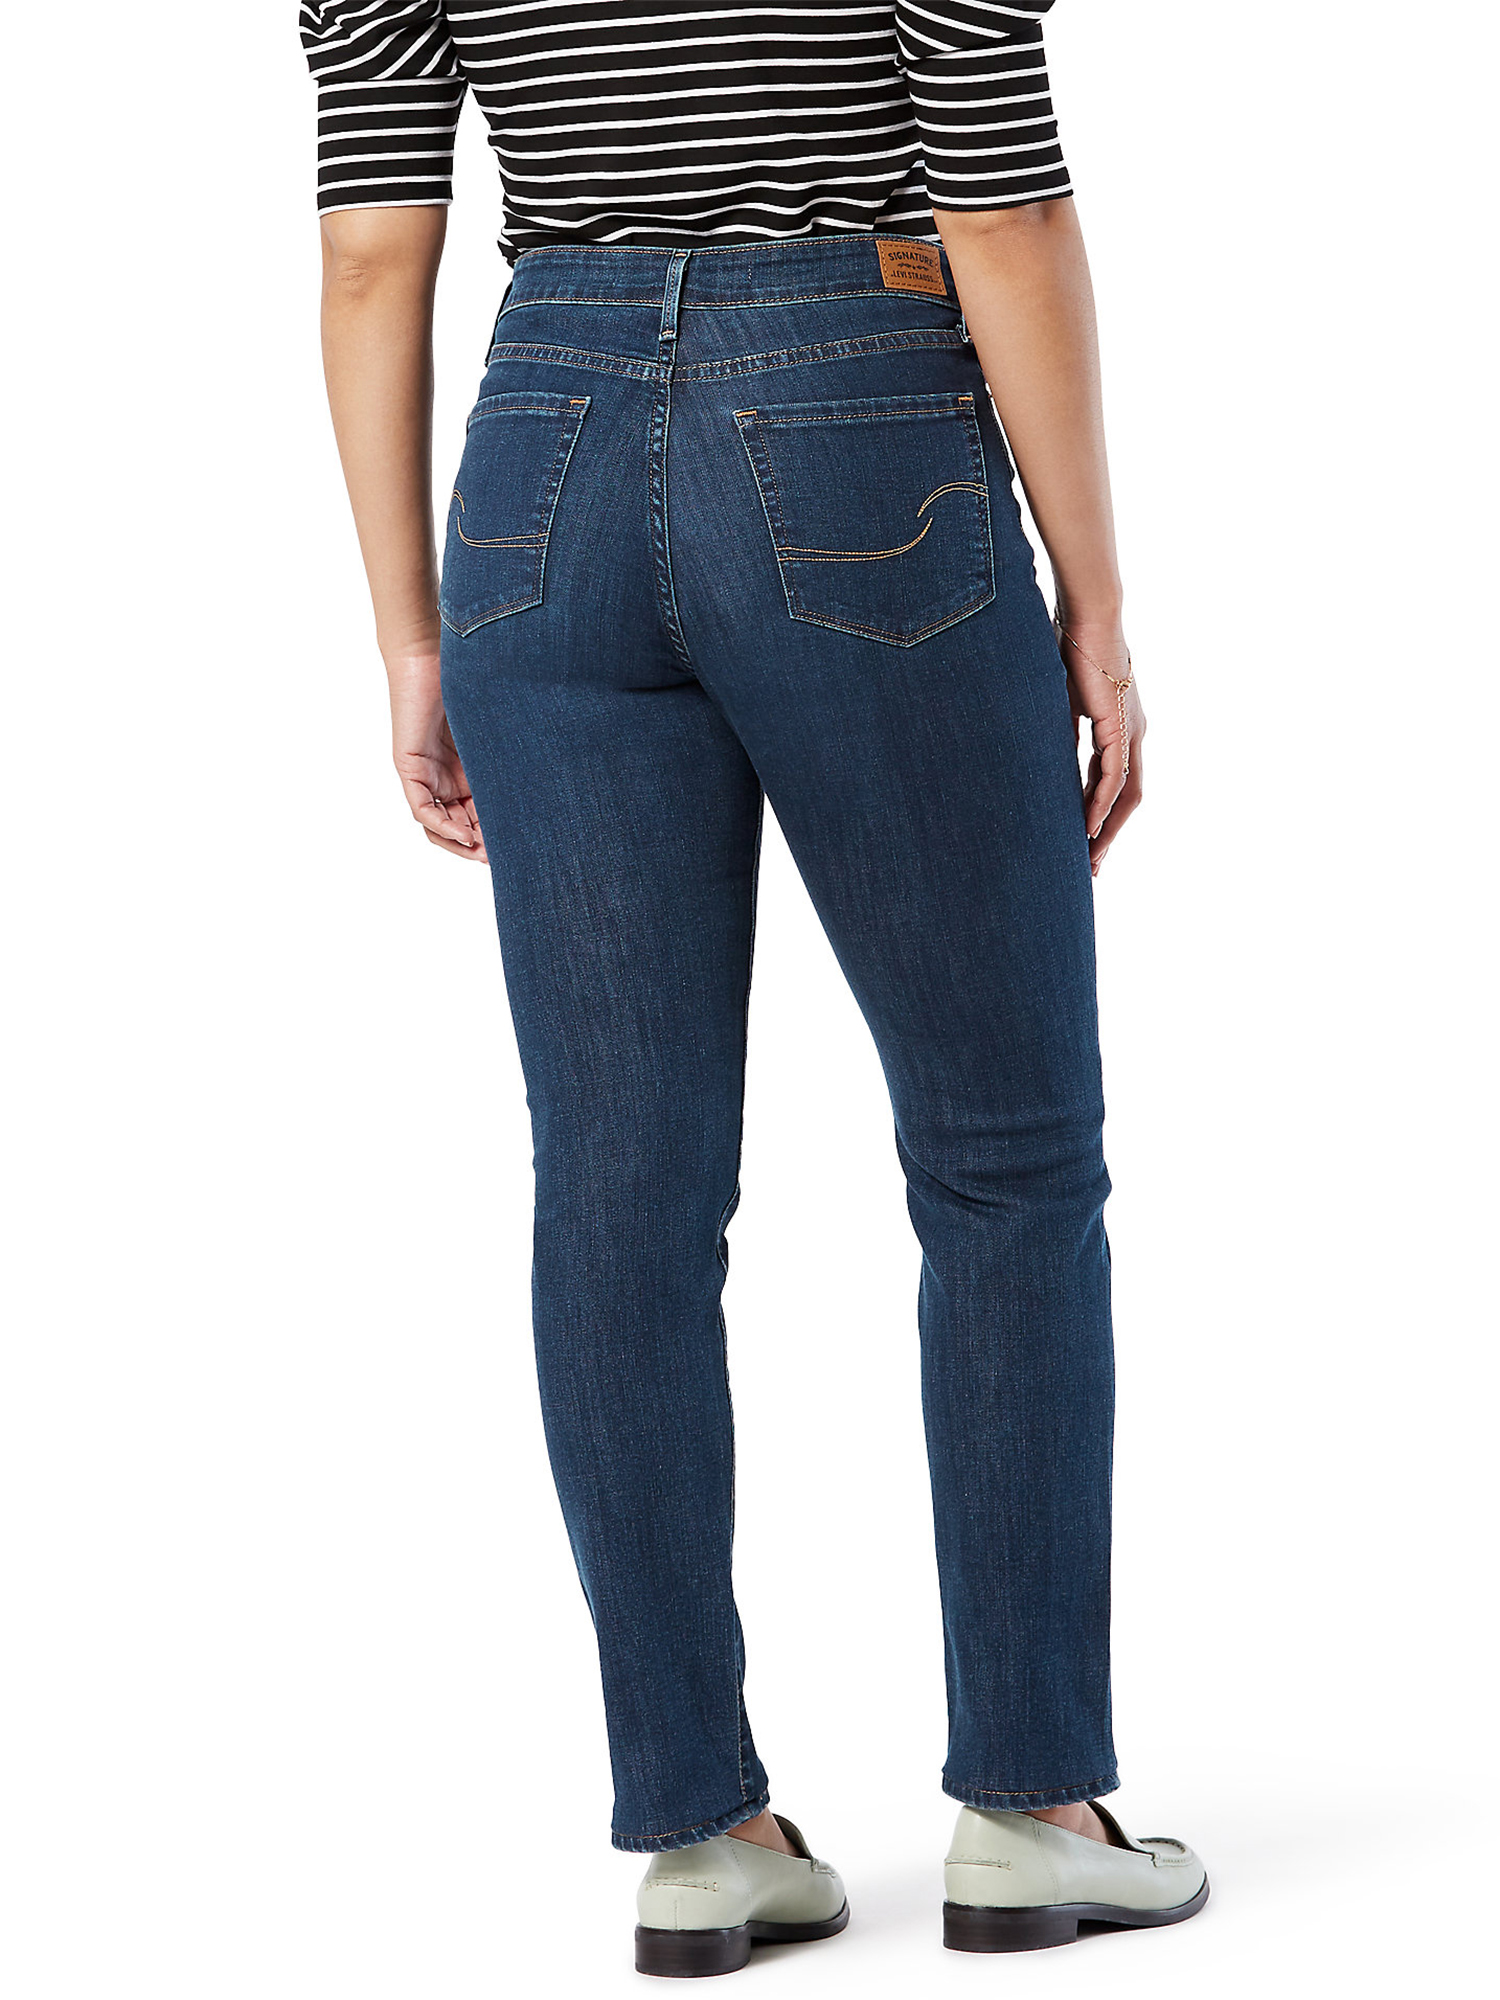 Signature by Levi Strauss & Co. Women's and Women's Plus Size Mid Rise Modern Straight Jeans, Sizes 2-28 - image 4 of 8